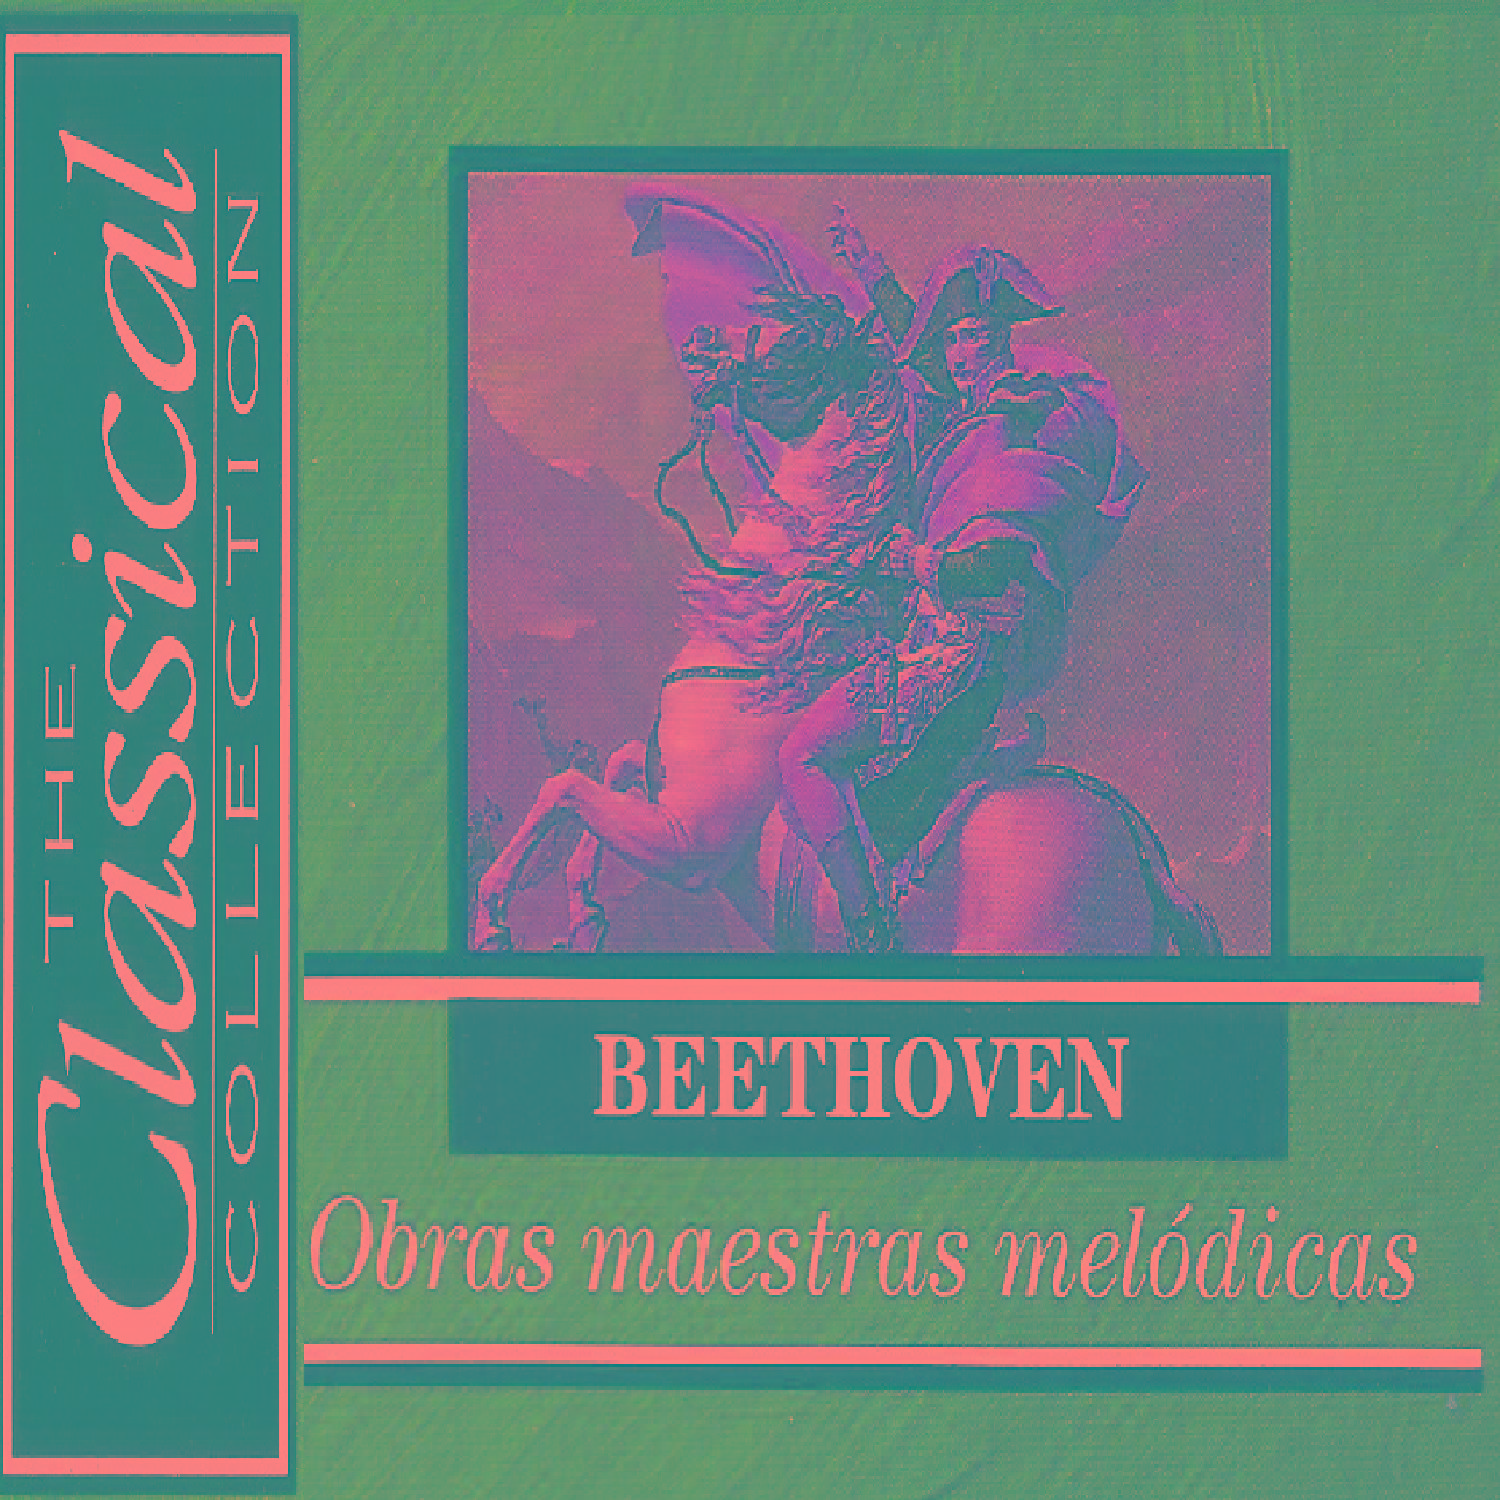 The Classical Collection  Beethoven  Obras maestras melo dicas